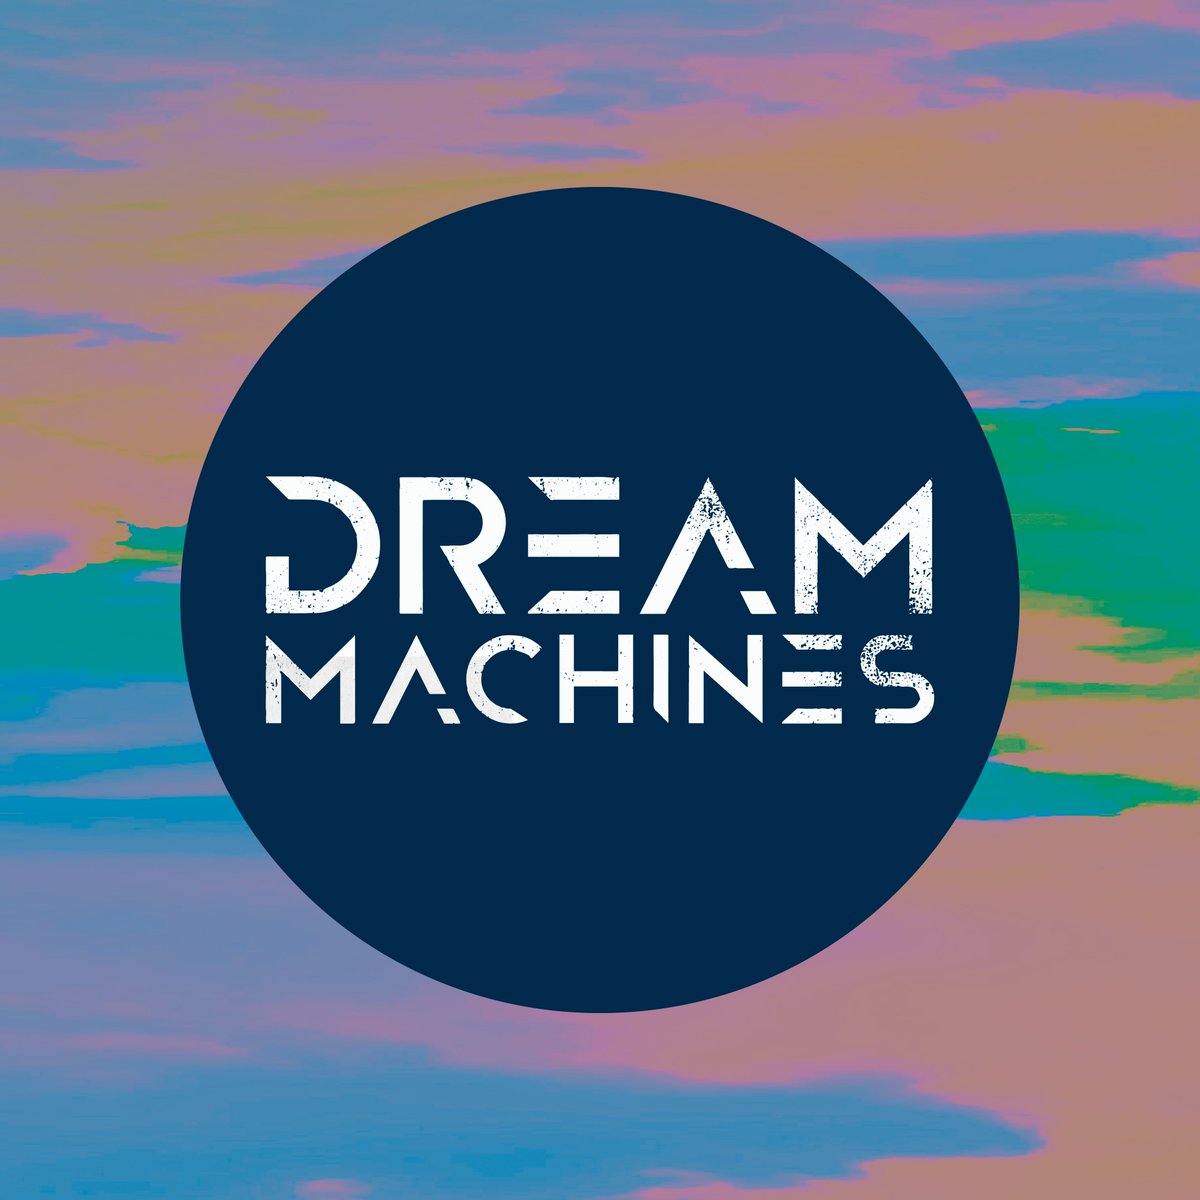 Matthew Collin is publishing some of the raw interviews he did for DREAM MACHINES on a new site ⚡️⚡️⚡️ Starting with @coseyfannitutti and @chris_carter_ (@ThrobbingGrstle)! It's intended as a UK electronic music resource for readers & researchers. dreammachinesinterviews.blogspot.com